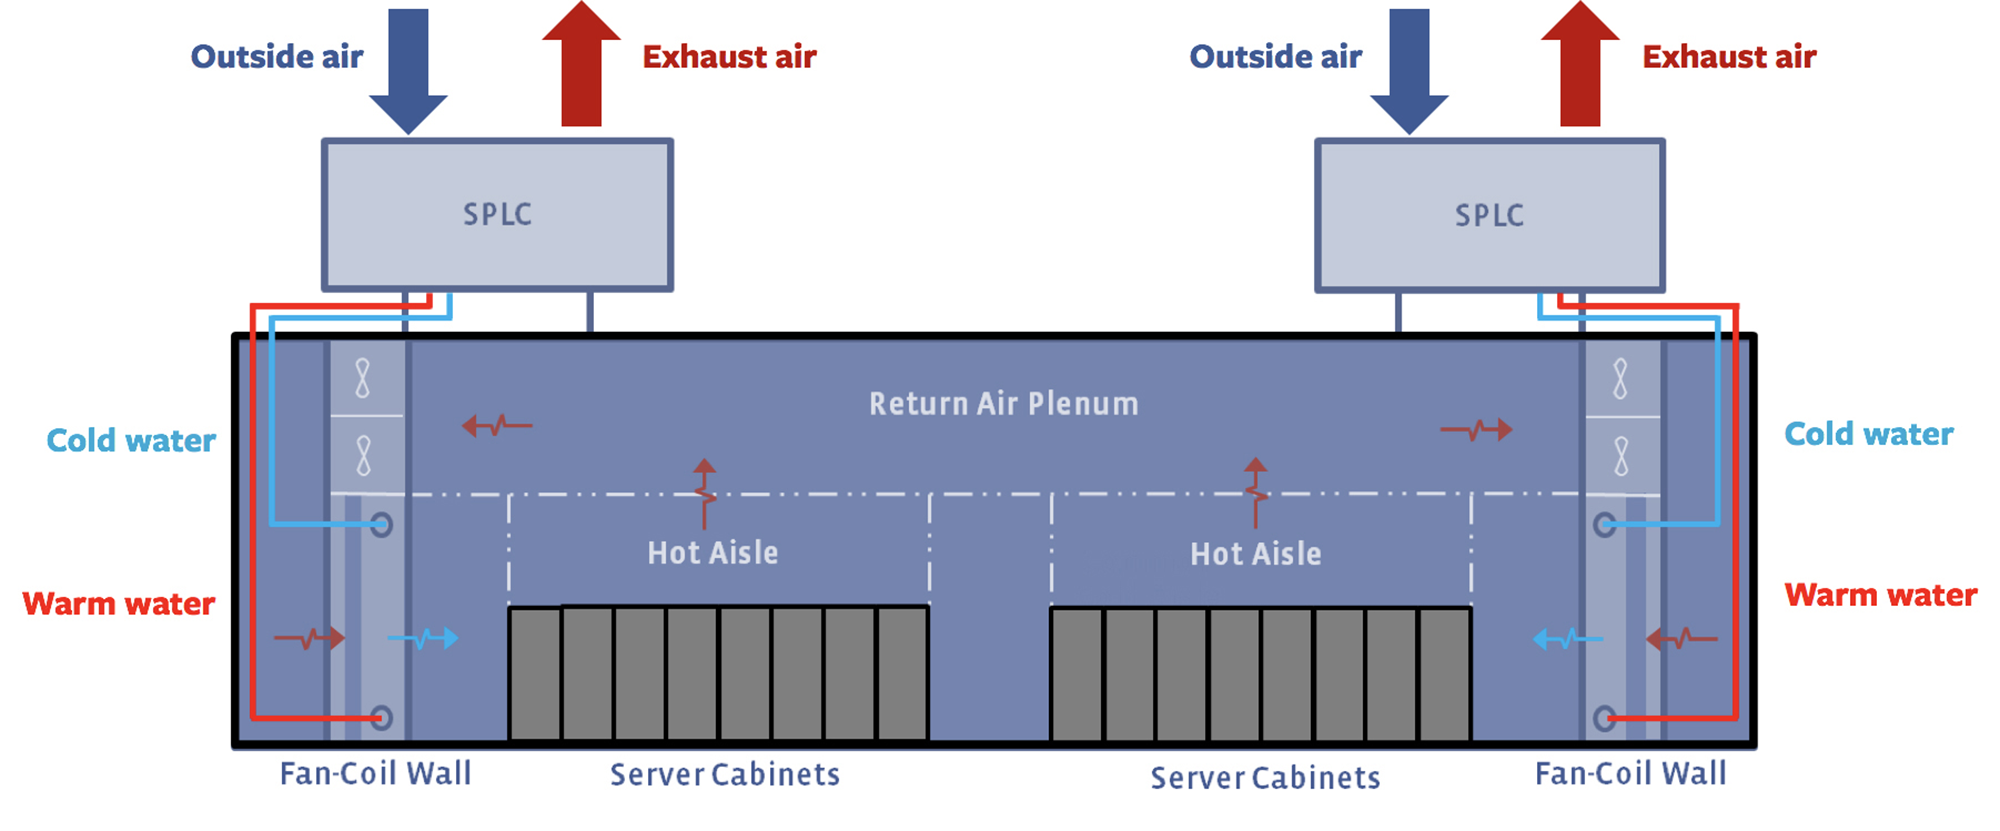 Schematic of the SPLC cooling scheme for a data center: The SPLC units are deployed on the rooftop. These SPLC units produce cold water, which is then supplied to the fan-coil wall (FCW) unit. These FCW units use the cold water supplied by the SPLC units to cool the servers. The hot water from these FCW units is returned to SPLC units, where it will be cooled and recycled through the system.